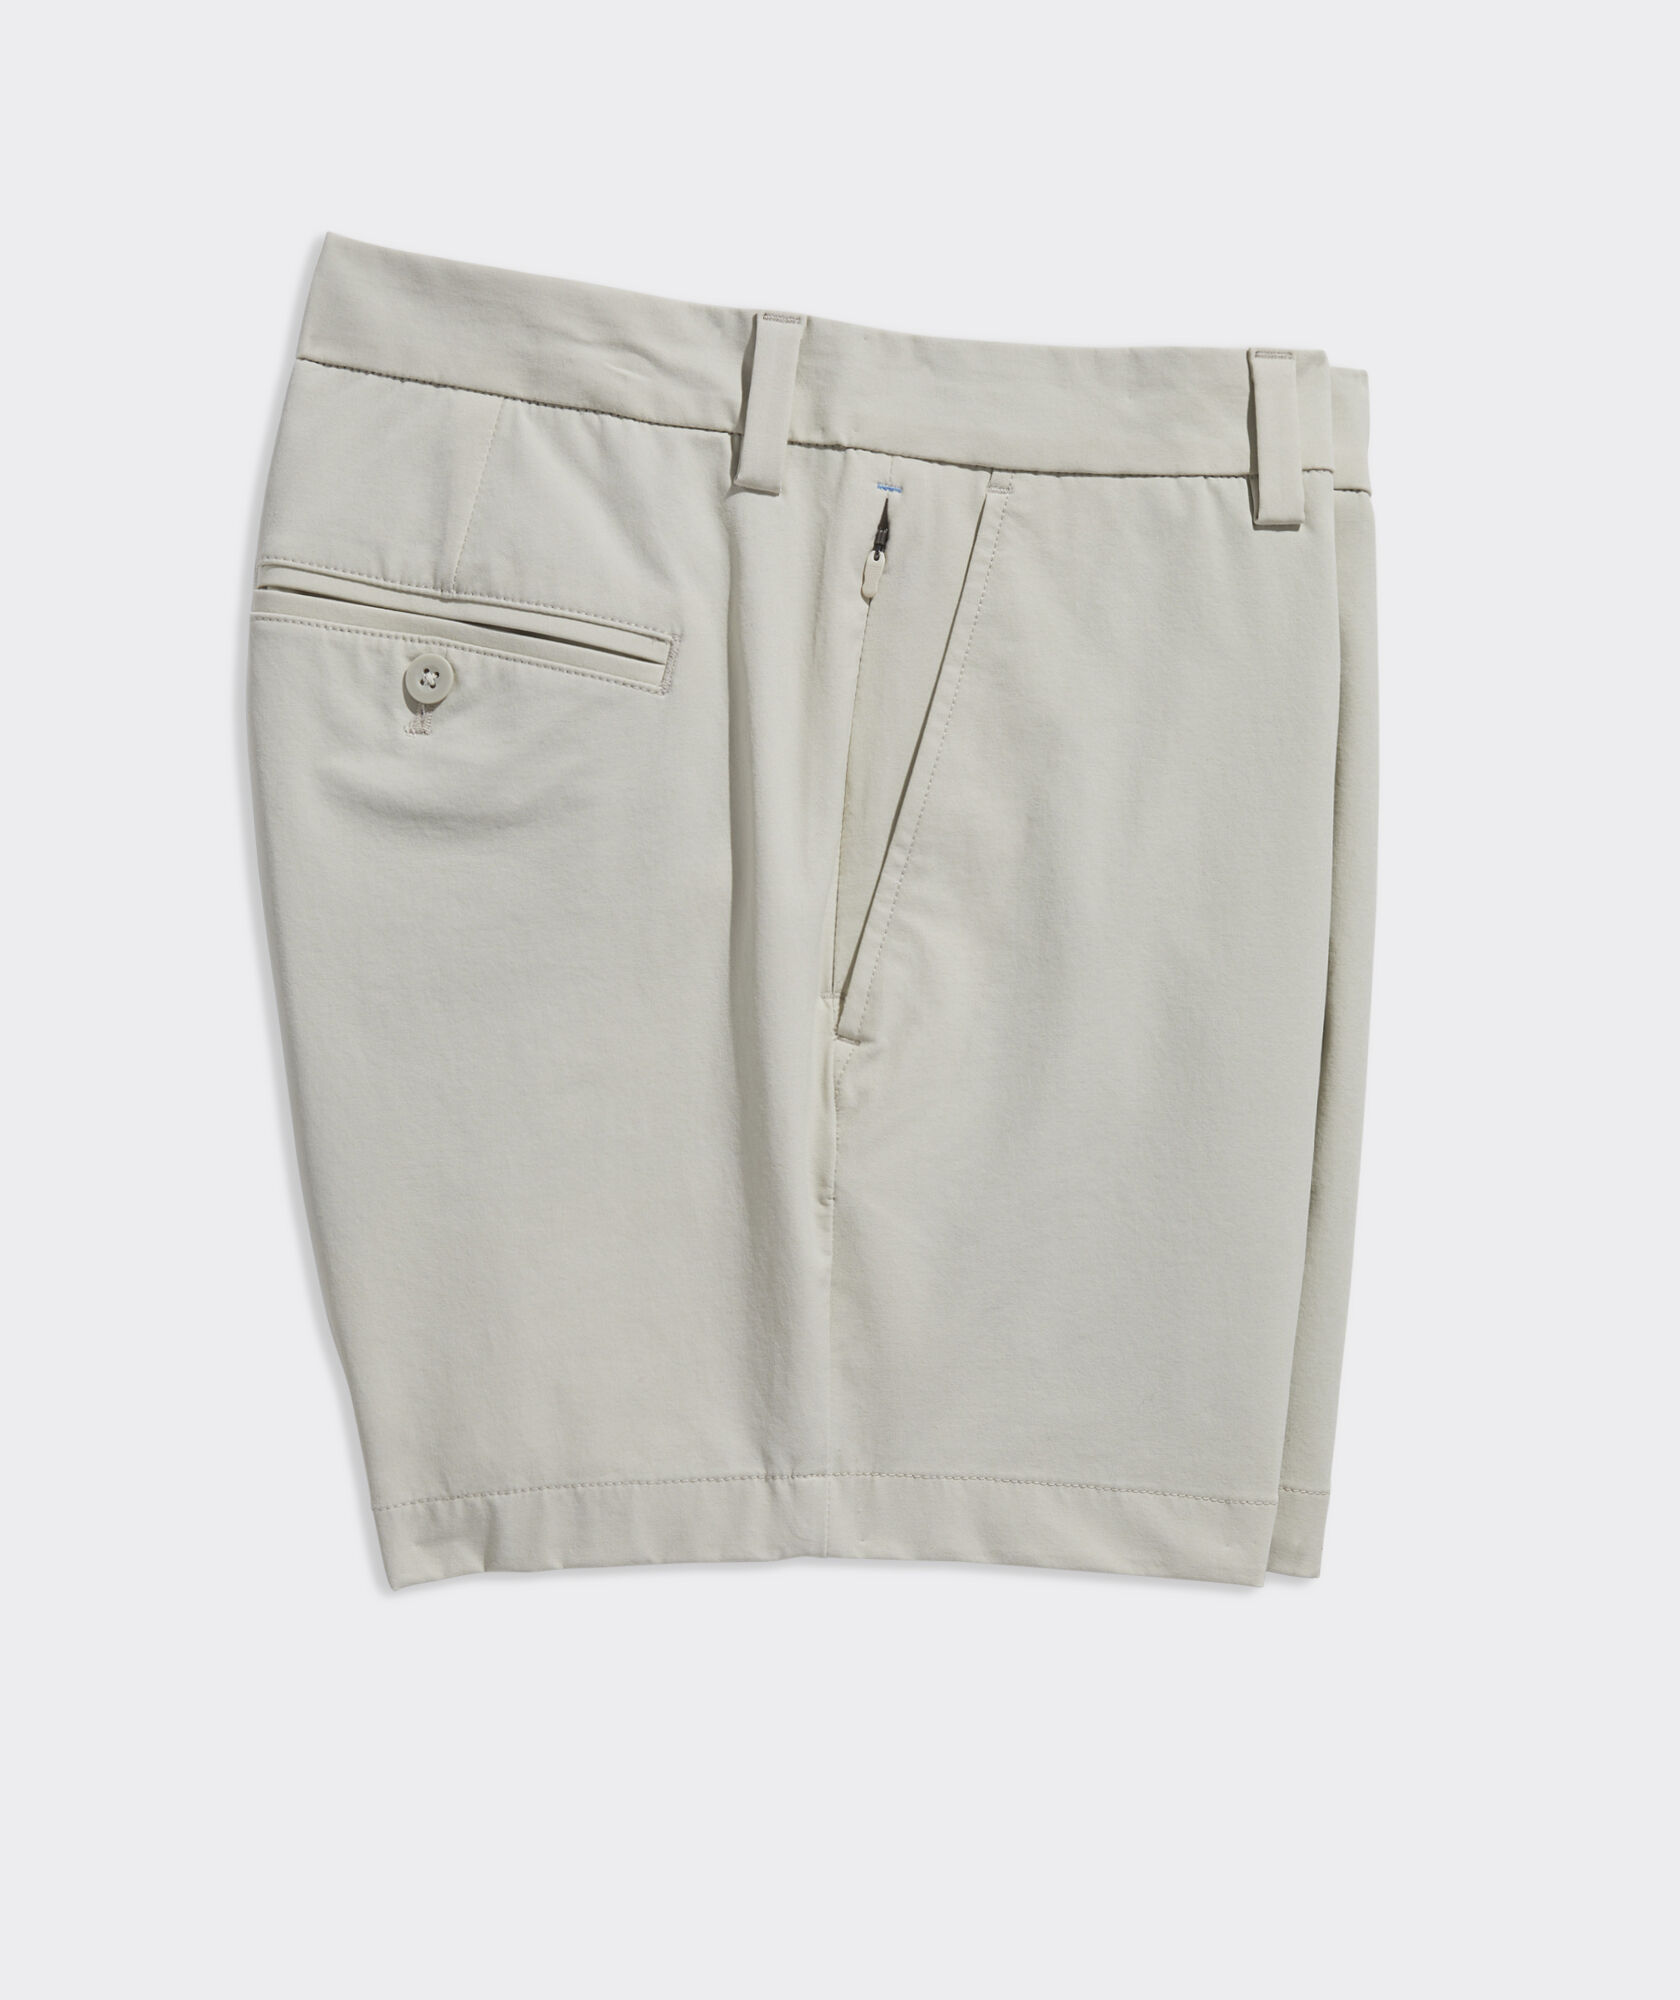 5 Inch On-The-Go Performance Shorts